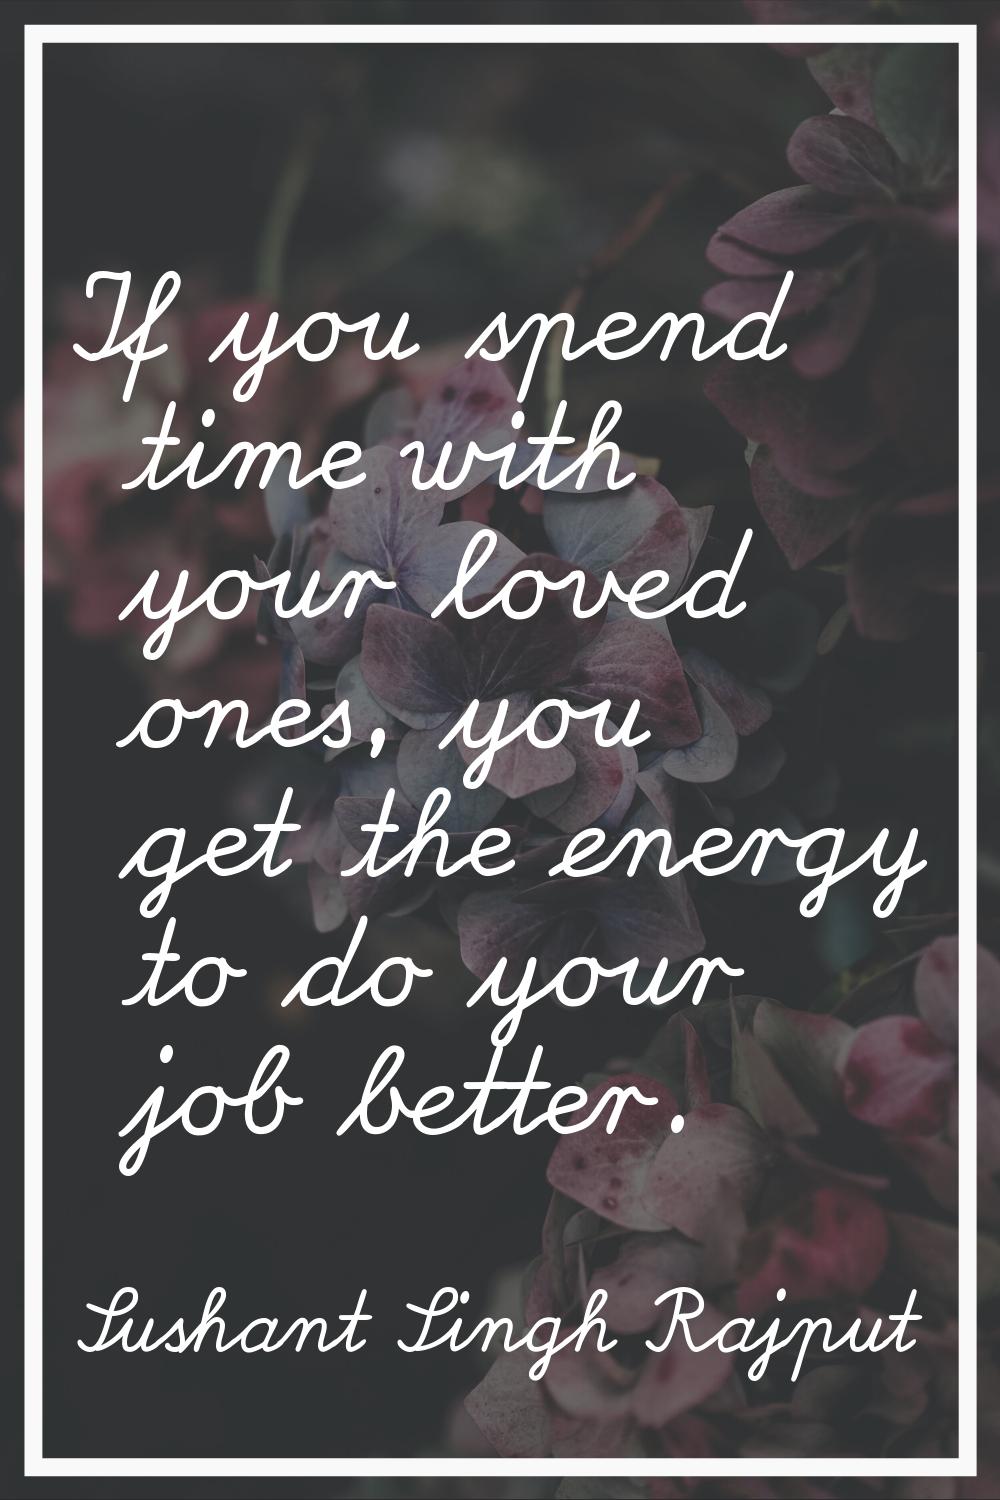 If you spend time with your loved ones, you get the energy to do your job better.